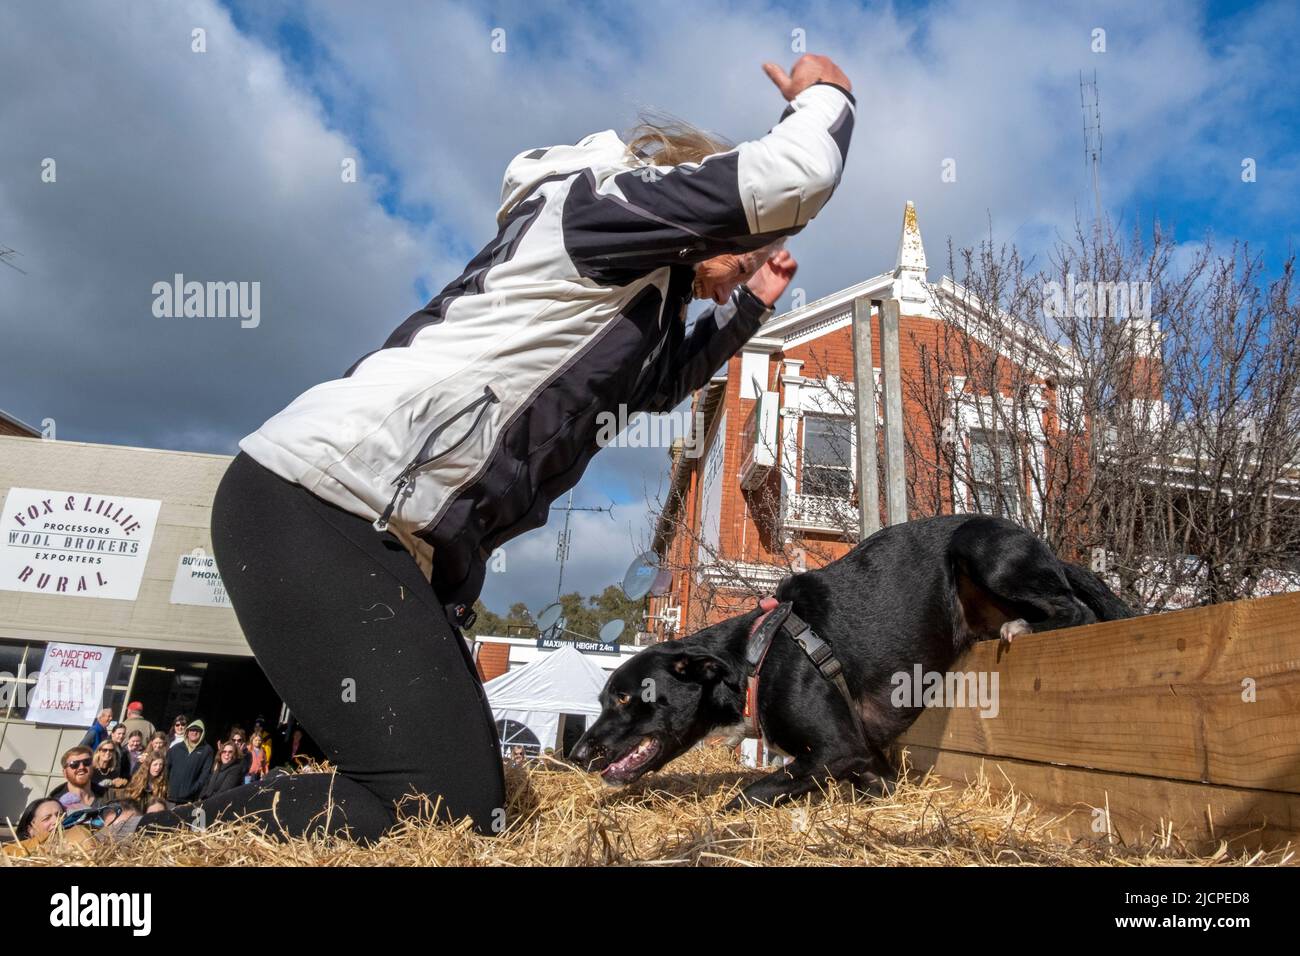 A Kelpie dog climbs a wall during a race at the Kelpie Muster in Casterton, Victoria, Australia Stock Photo